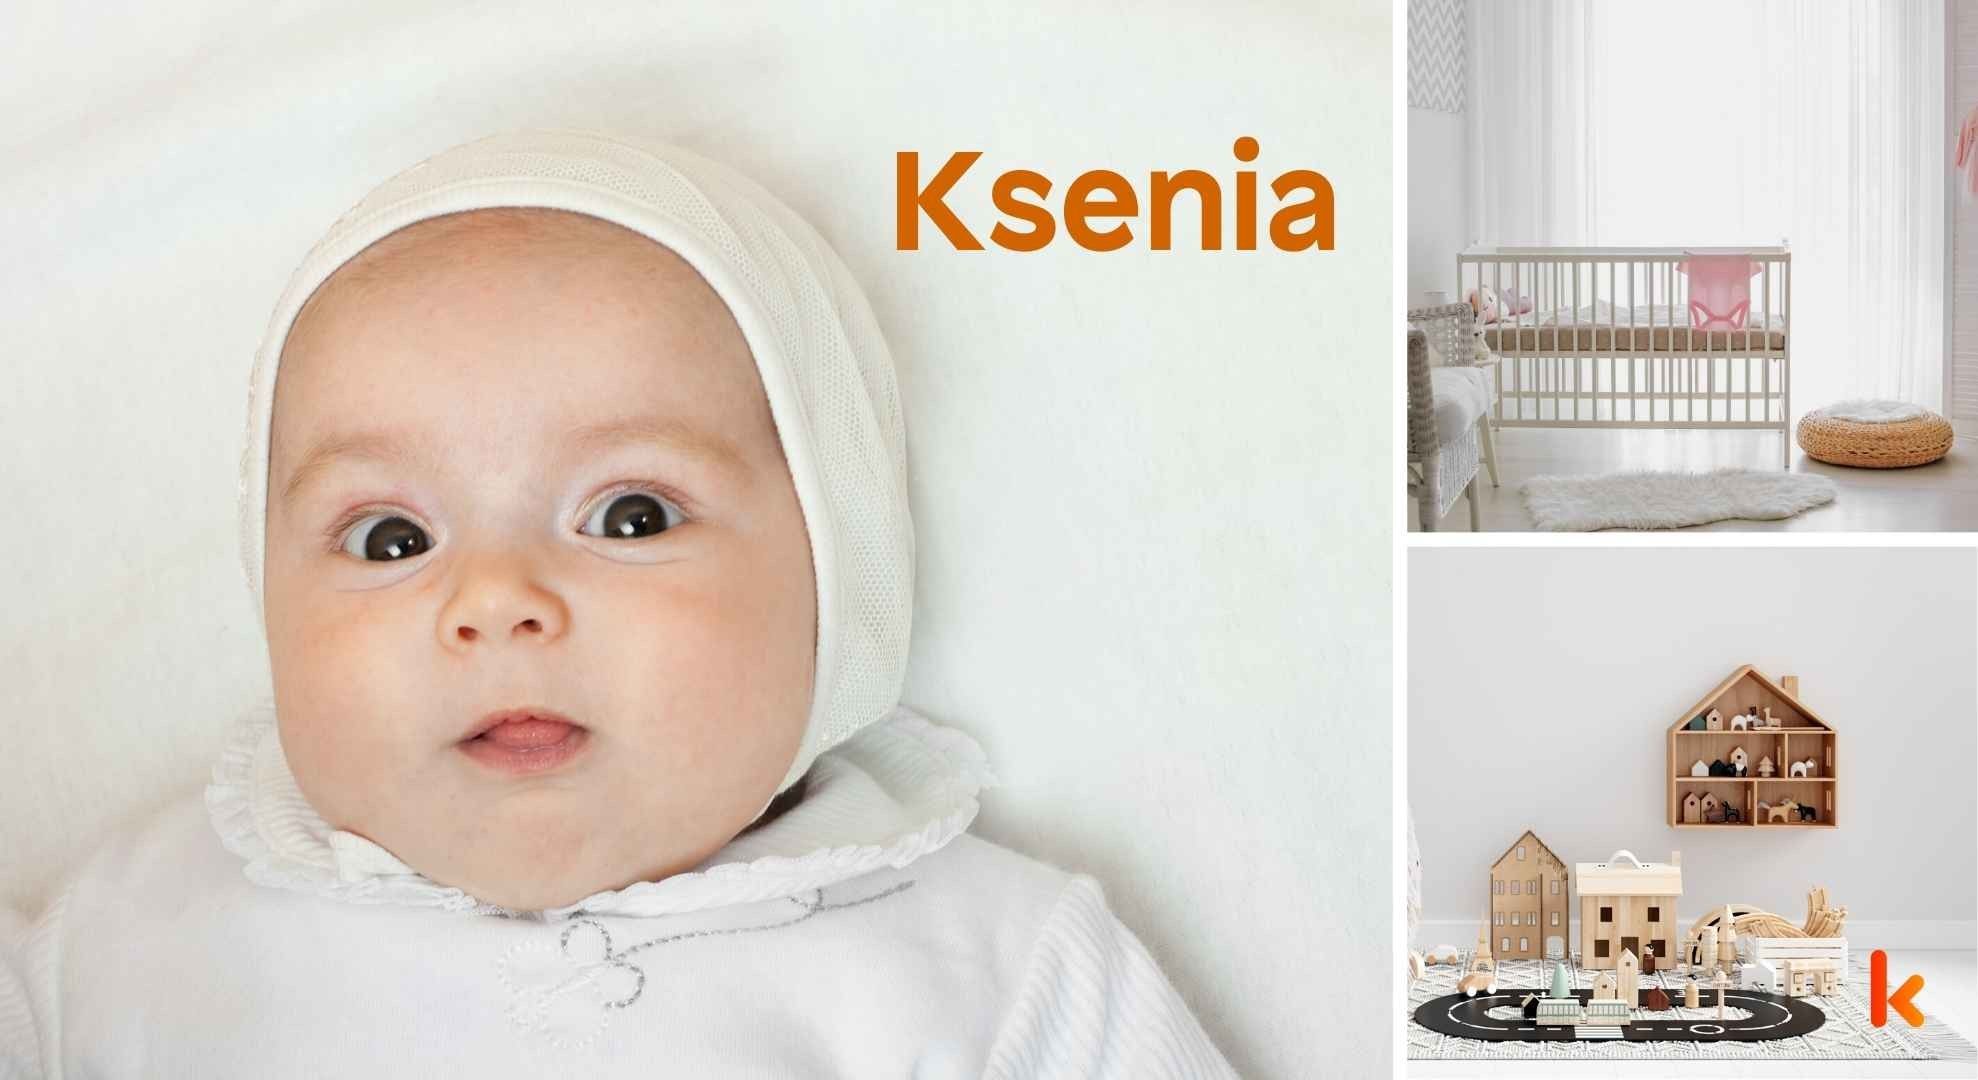 Meaning of the name Ksenia